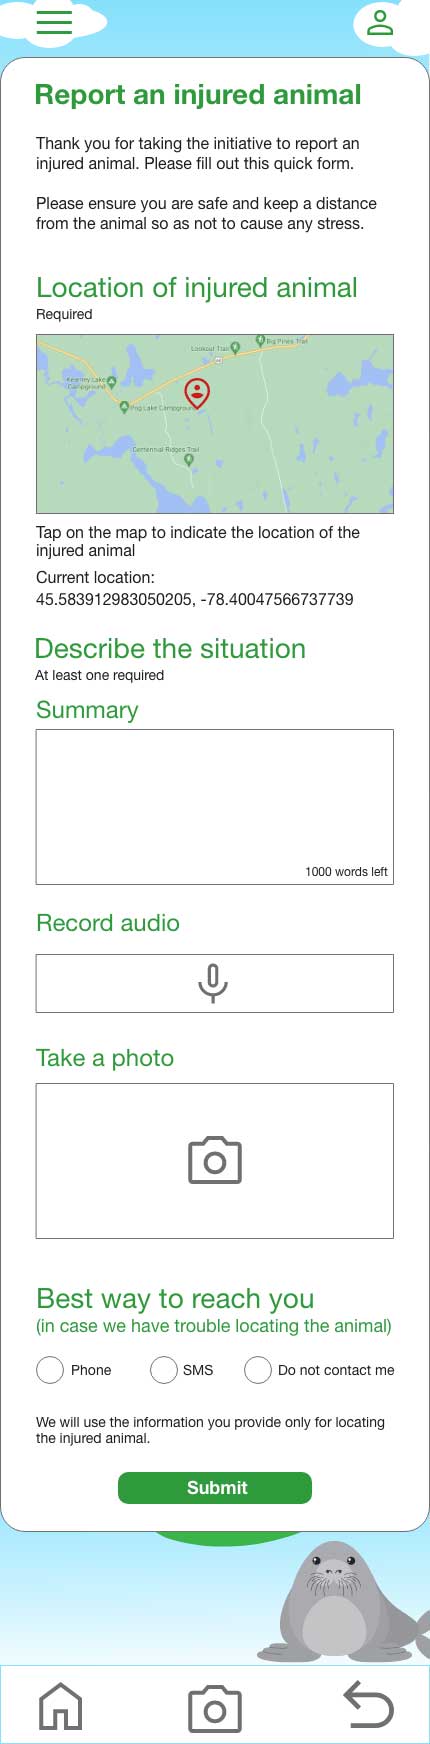 Colour mockup of a mobile app submit-a-report screen.